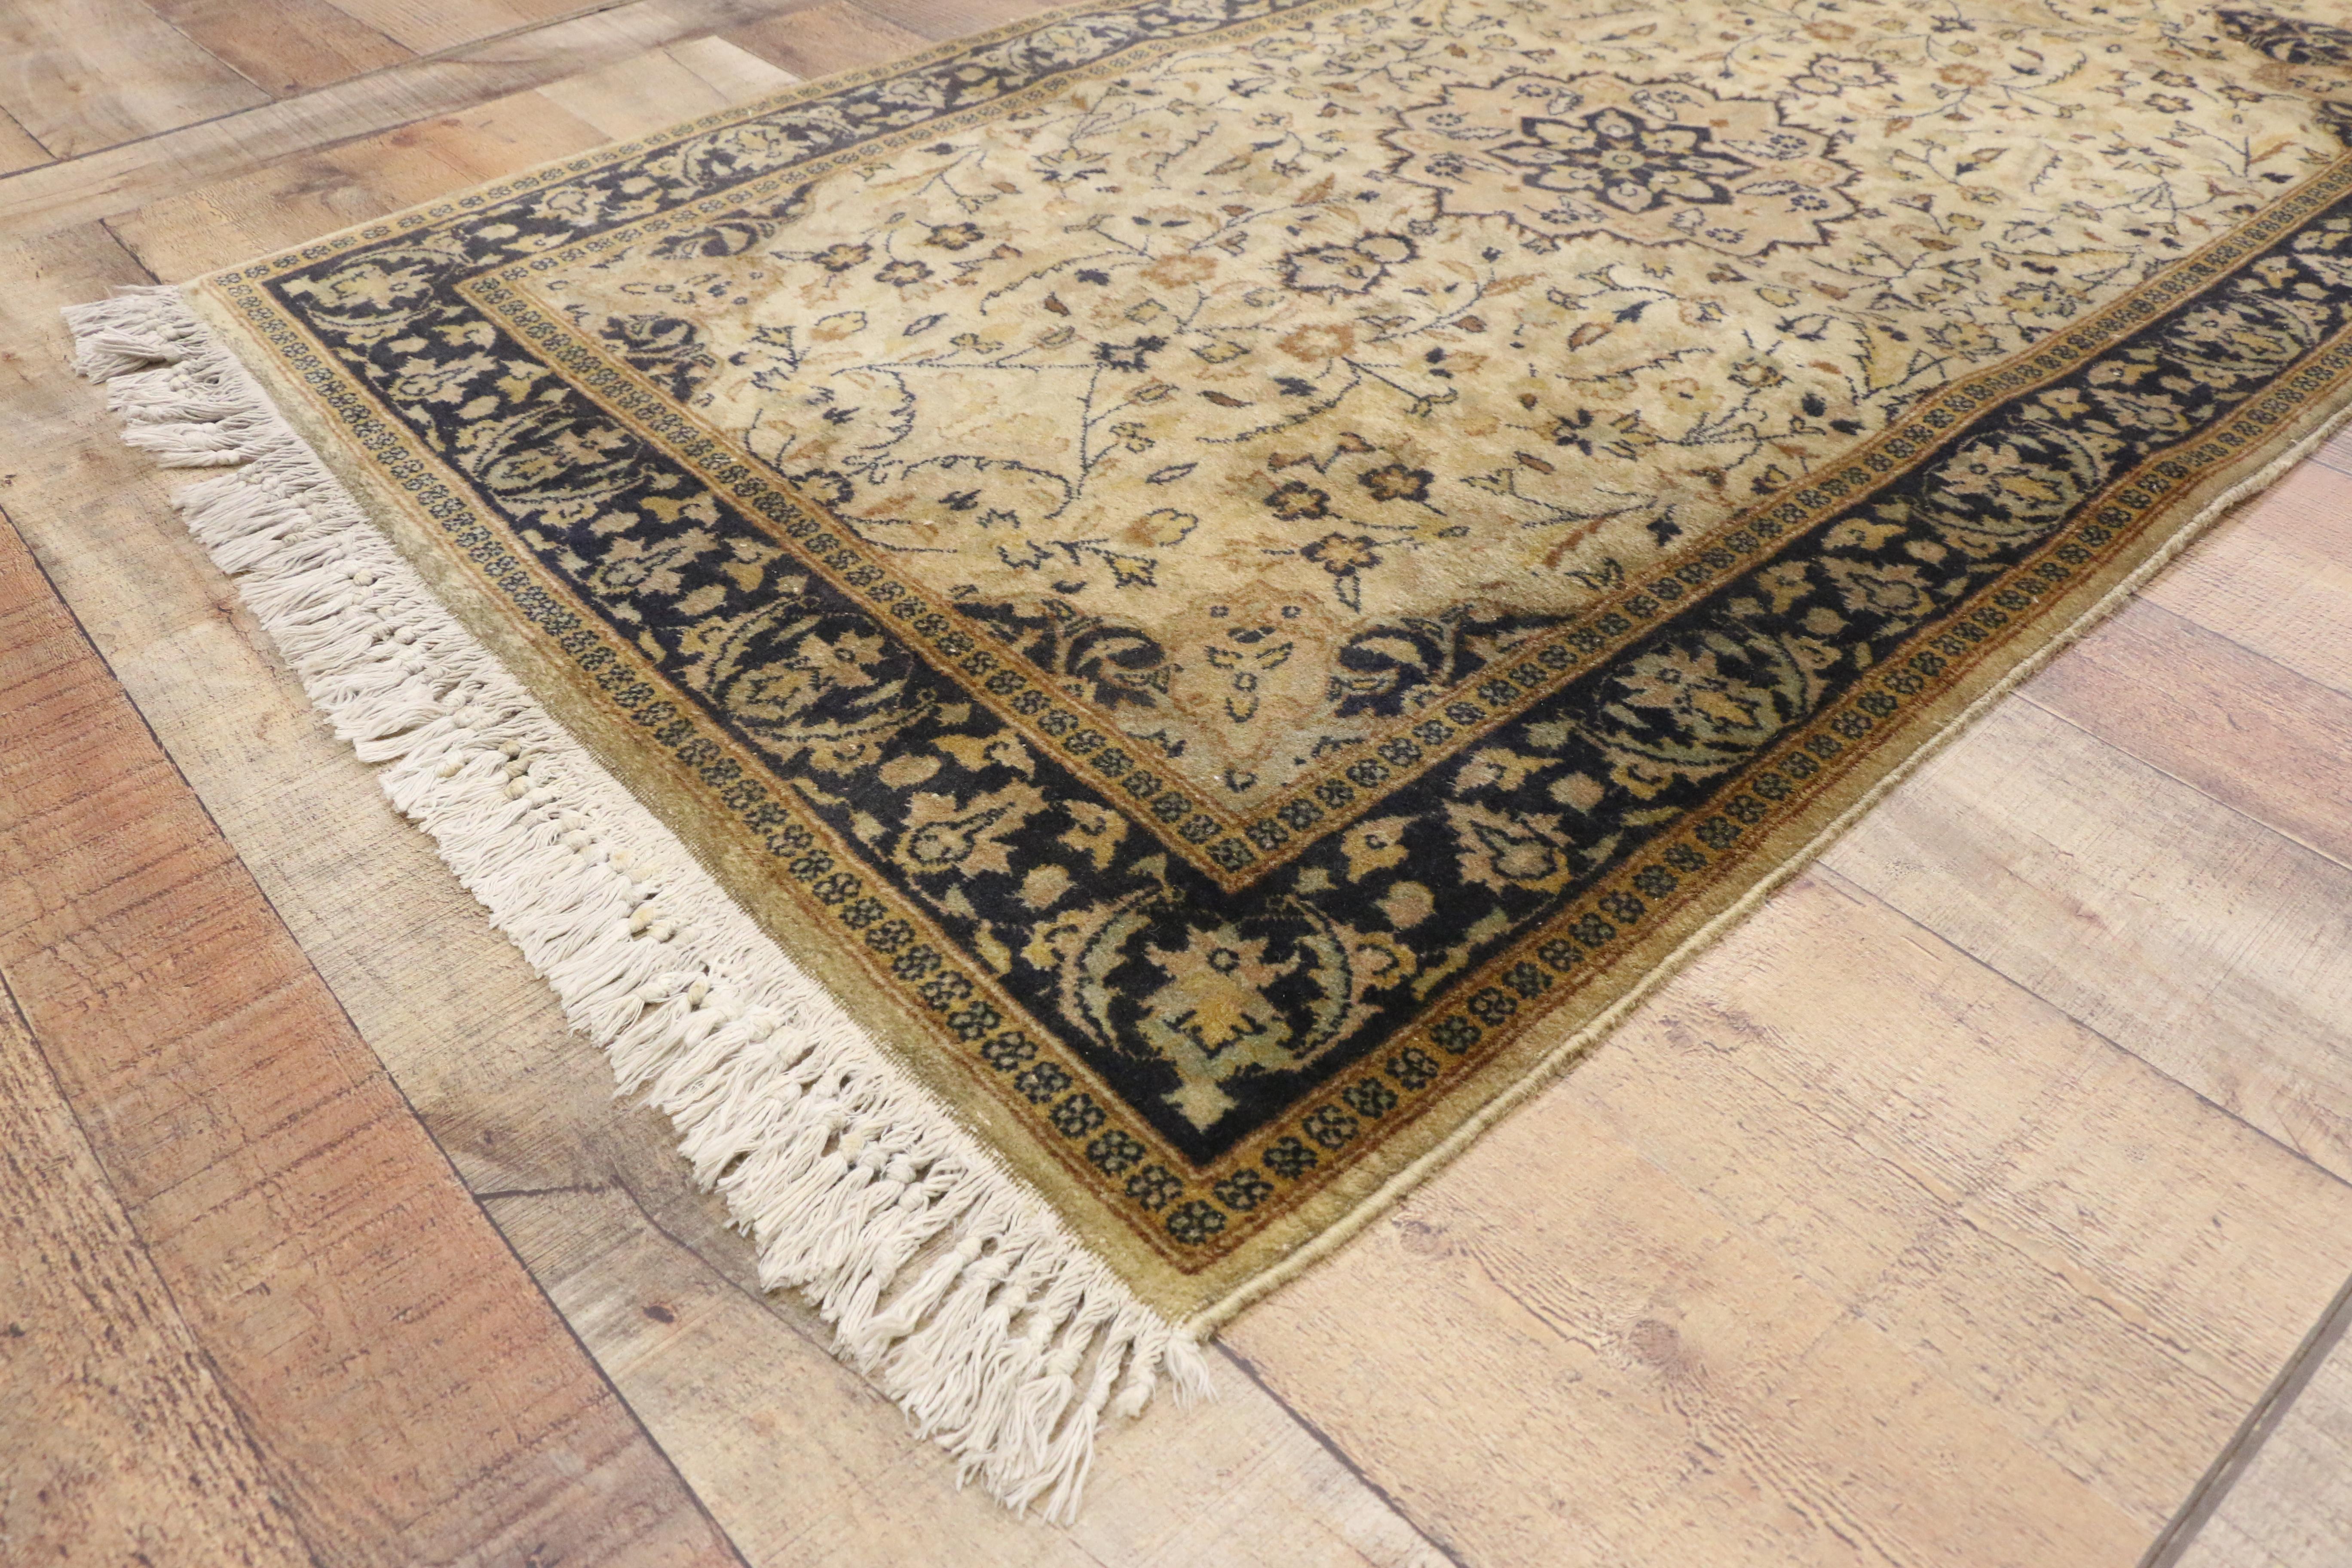 Vintage Pakistani Persian Isfahan Rug Carpet Runner In Good Condition For Sale In Dallas, TX